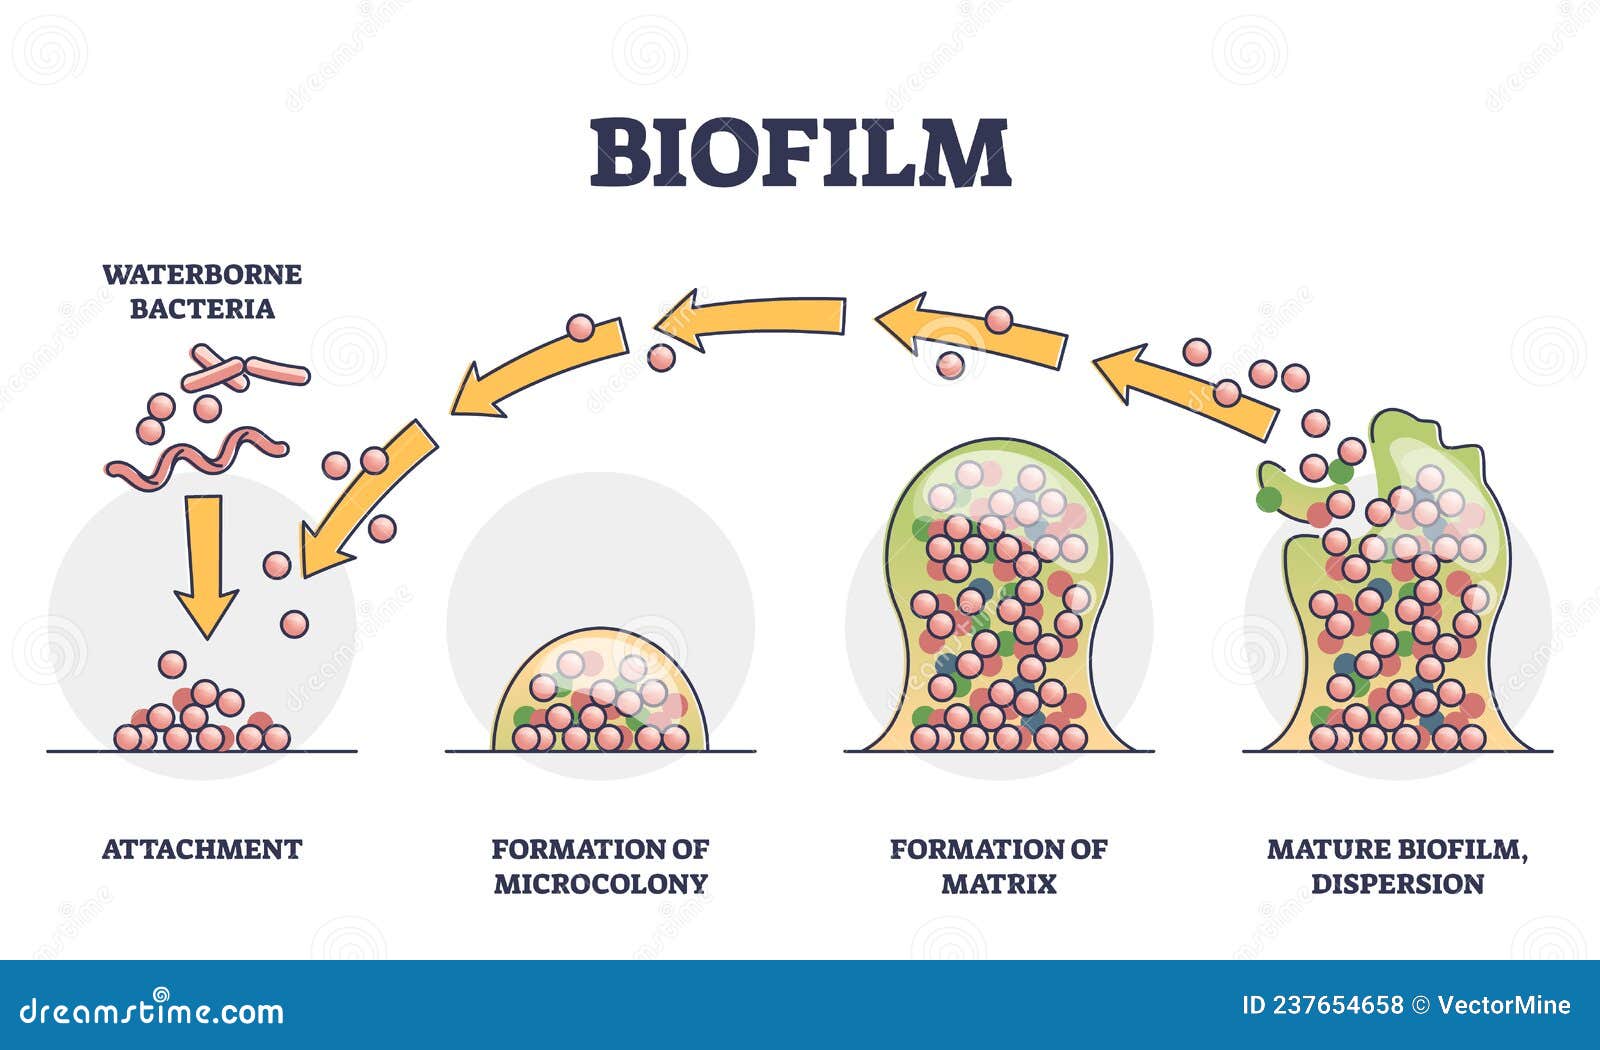 biofilm formation stages with development and dispersion outline diagram